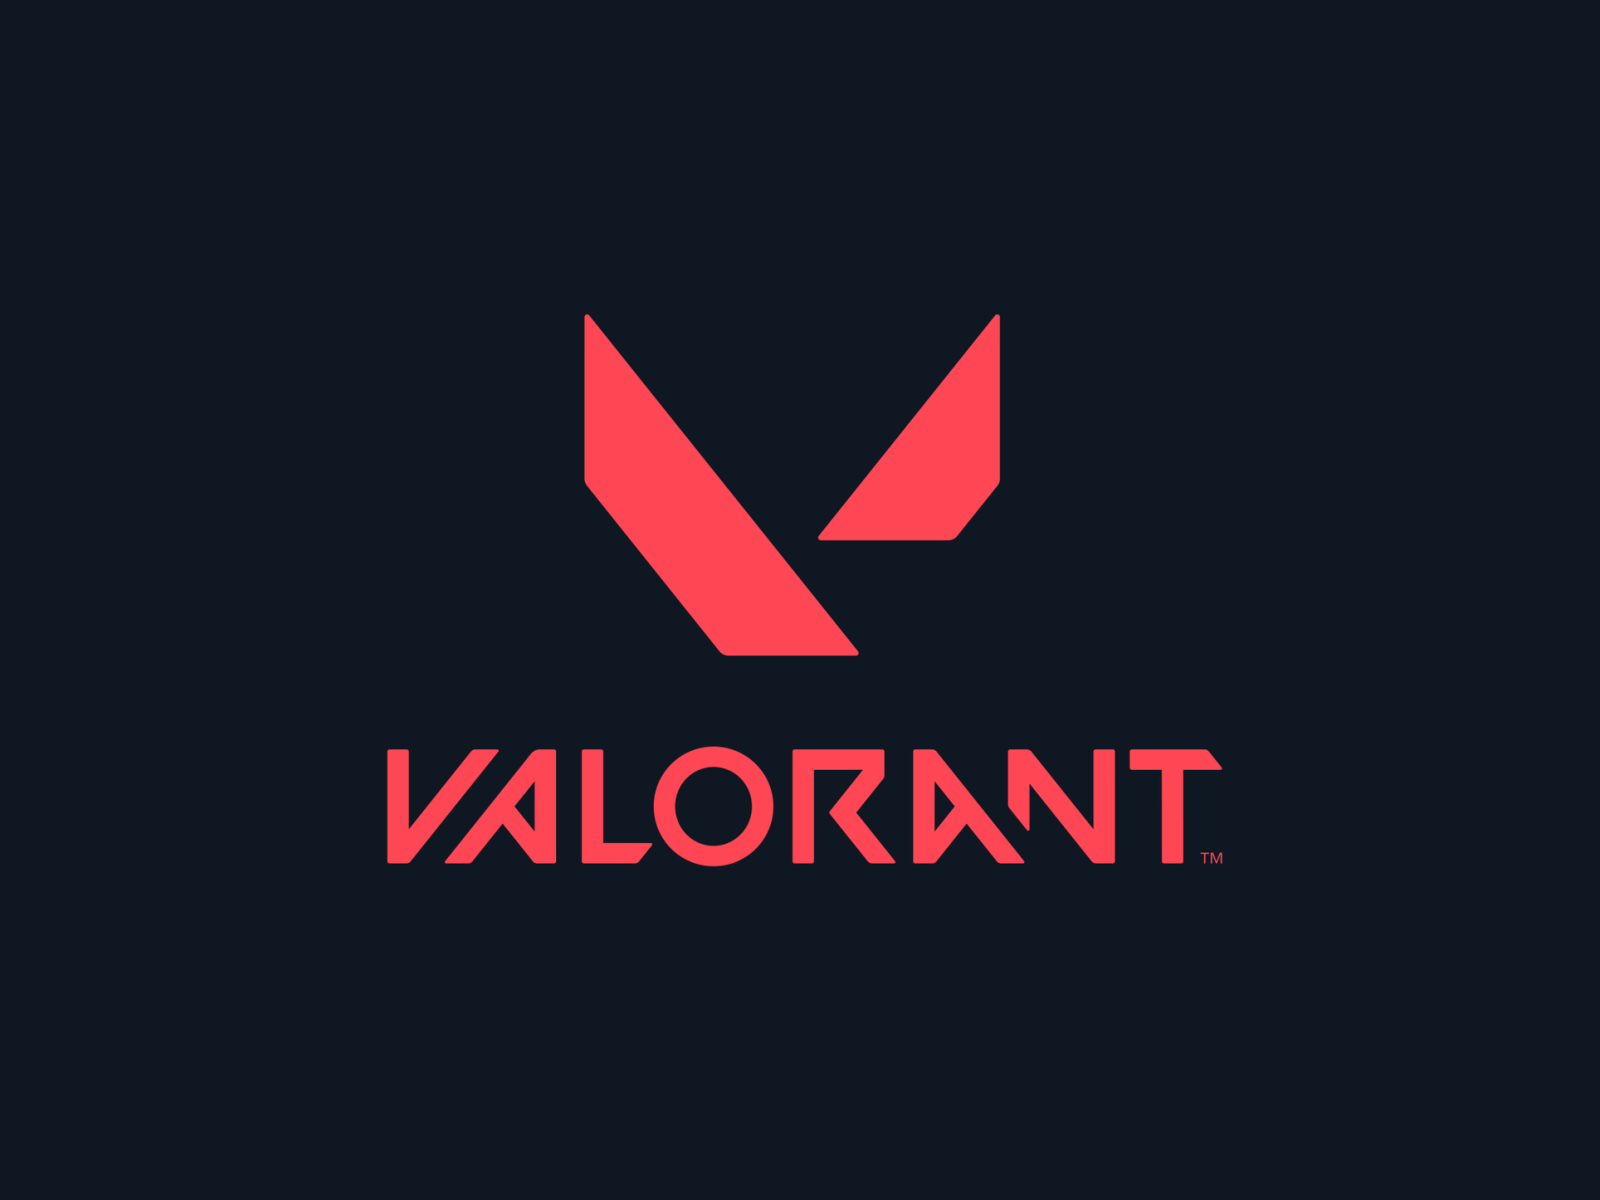 valorant total download size